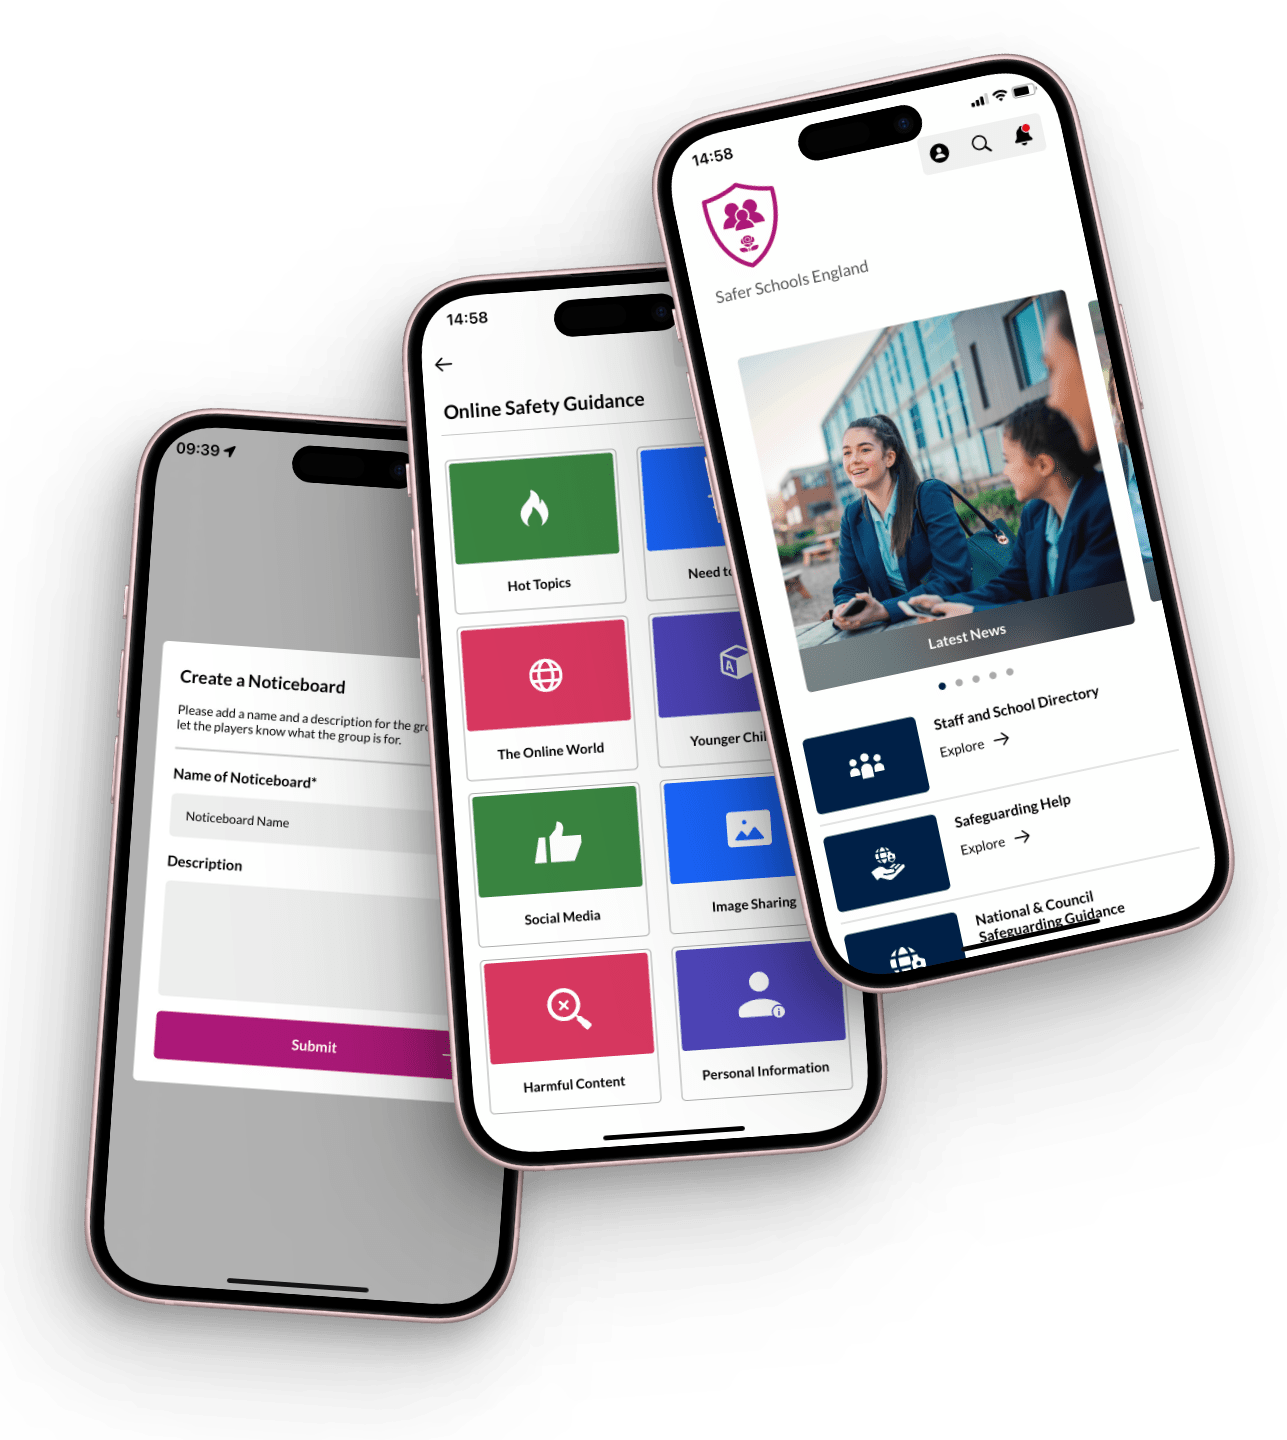 mock up of the safer schools england app showing the online safety guidance page and create a noticeboard page